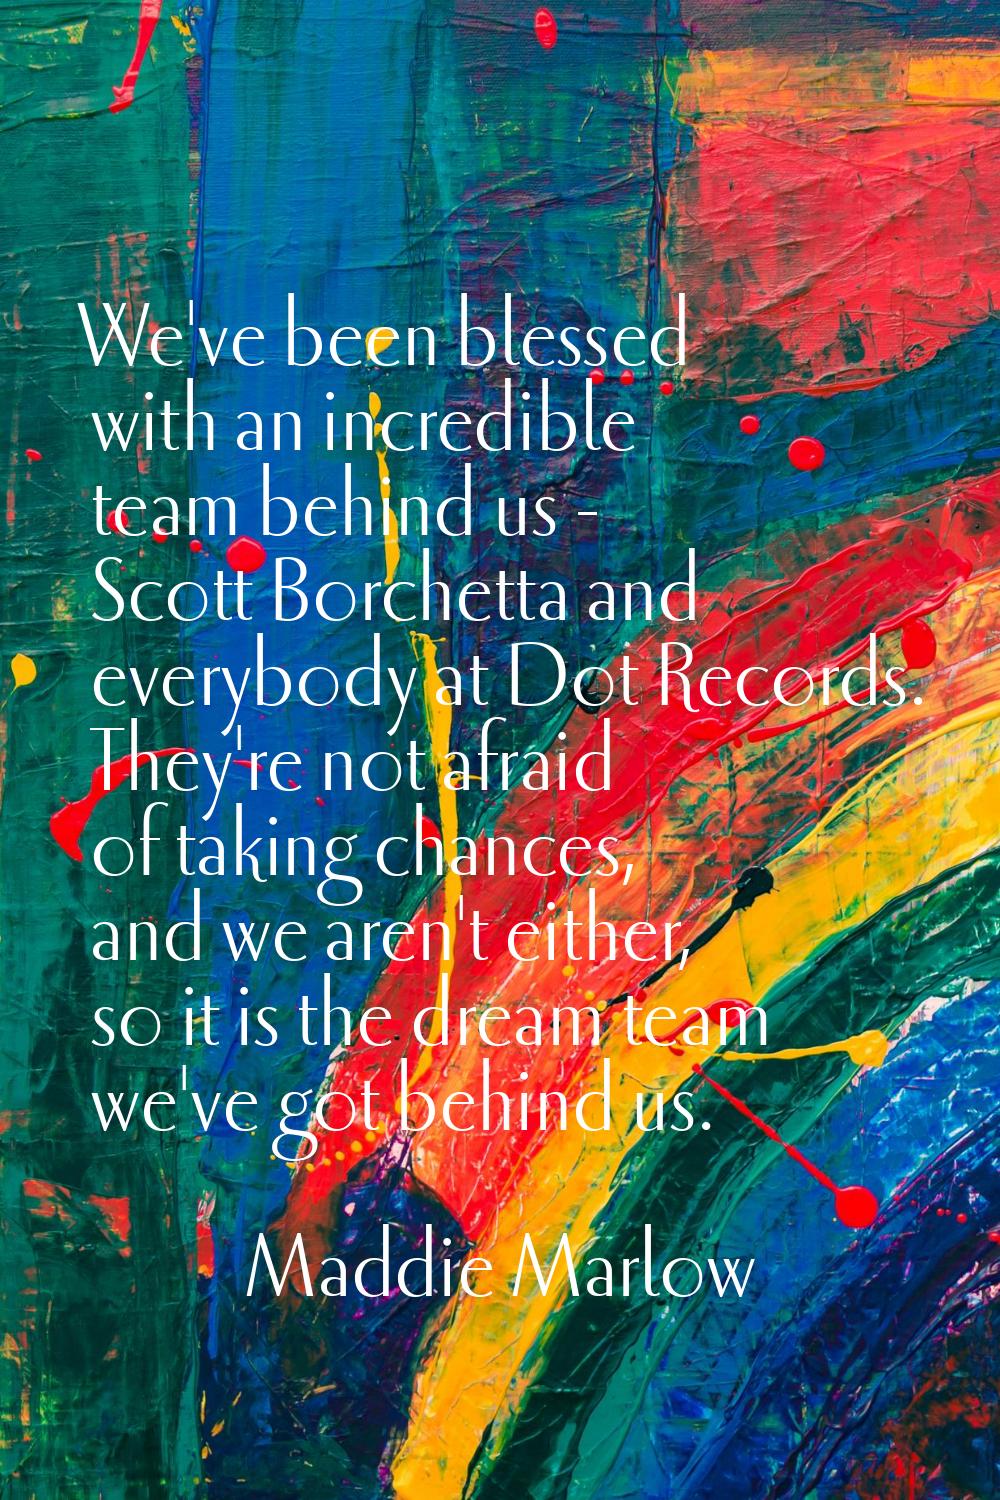 We've been blessed with an incredible team behind us - Scott Borchetta and everybody at Dot Records